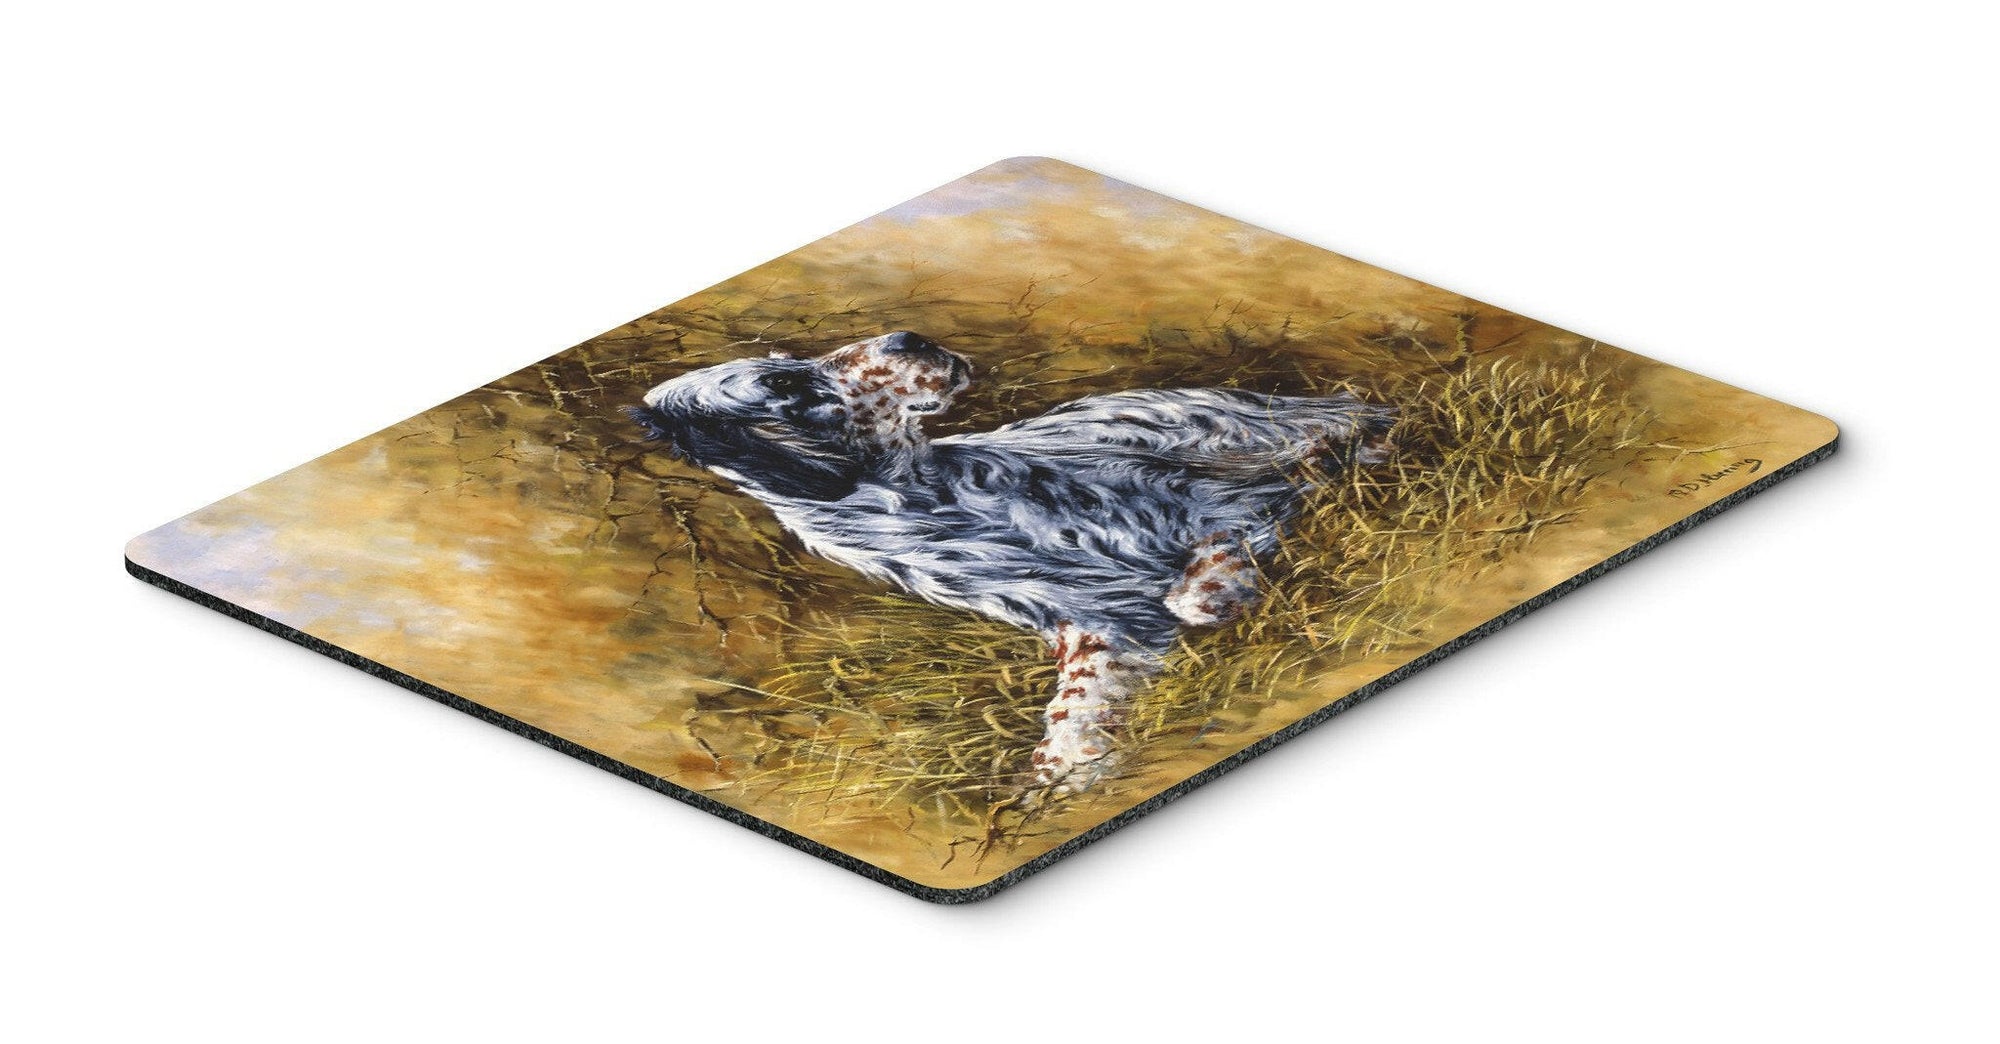 English Setter by Michael Herring Mouse Pad, Hot Pad or Trivet HMHE0007MP by Caroline's Treasures